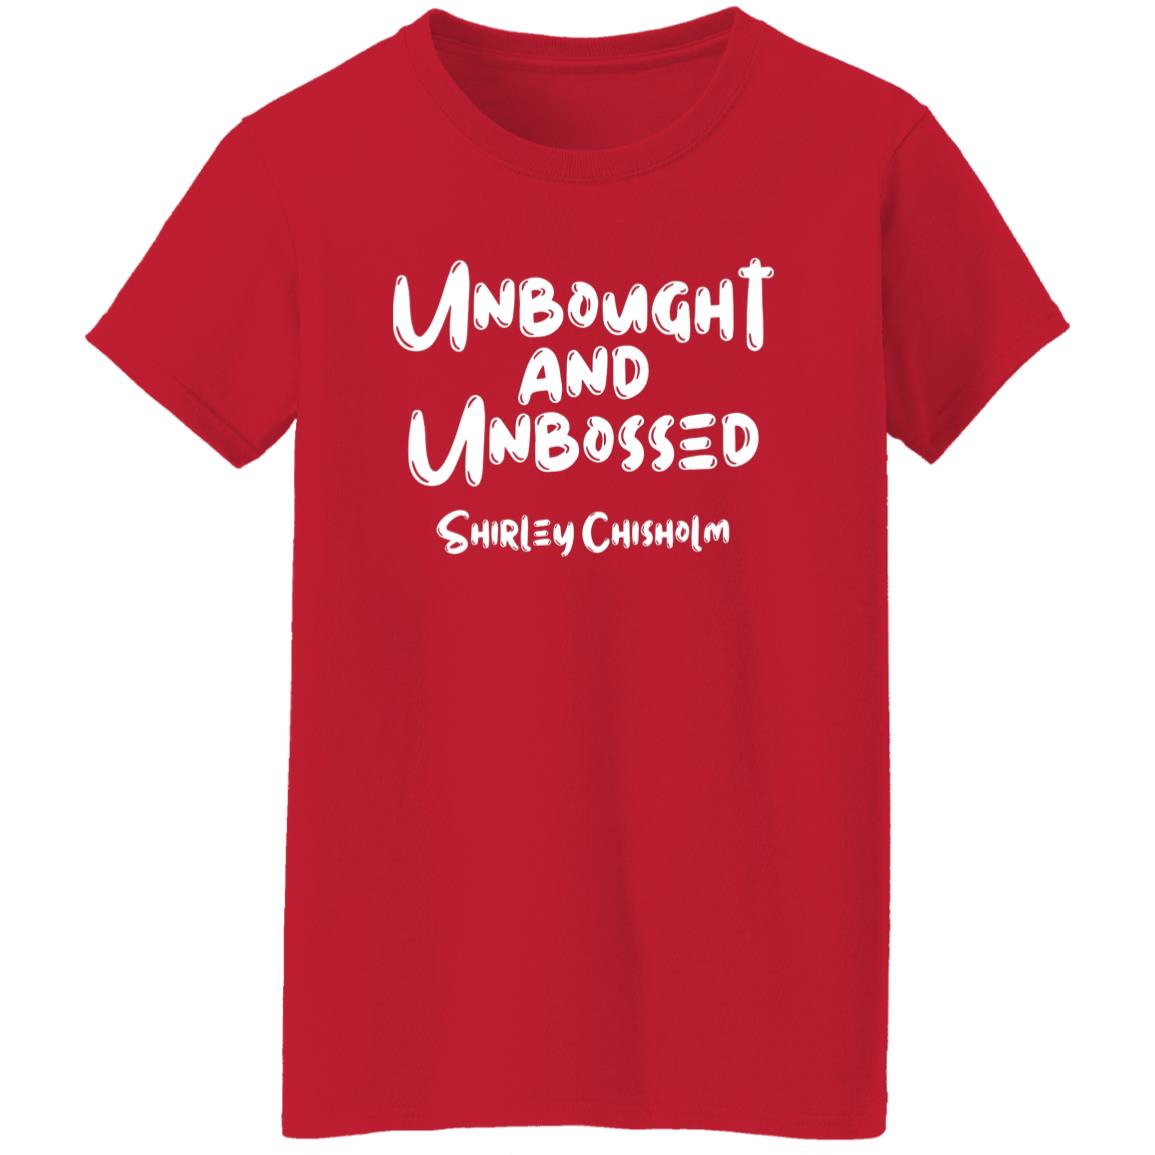 Shirley Chisholm Unbought And Unbossed T-Shirt